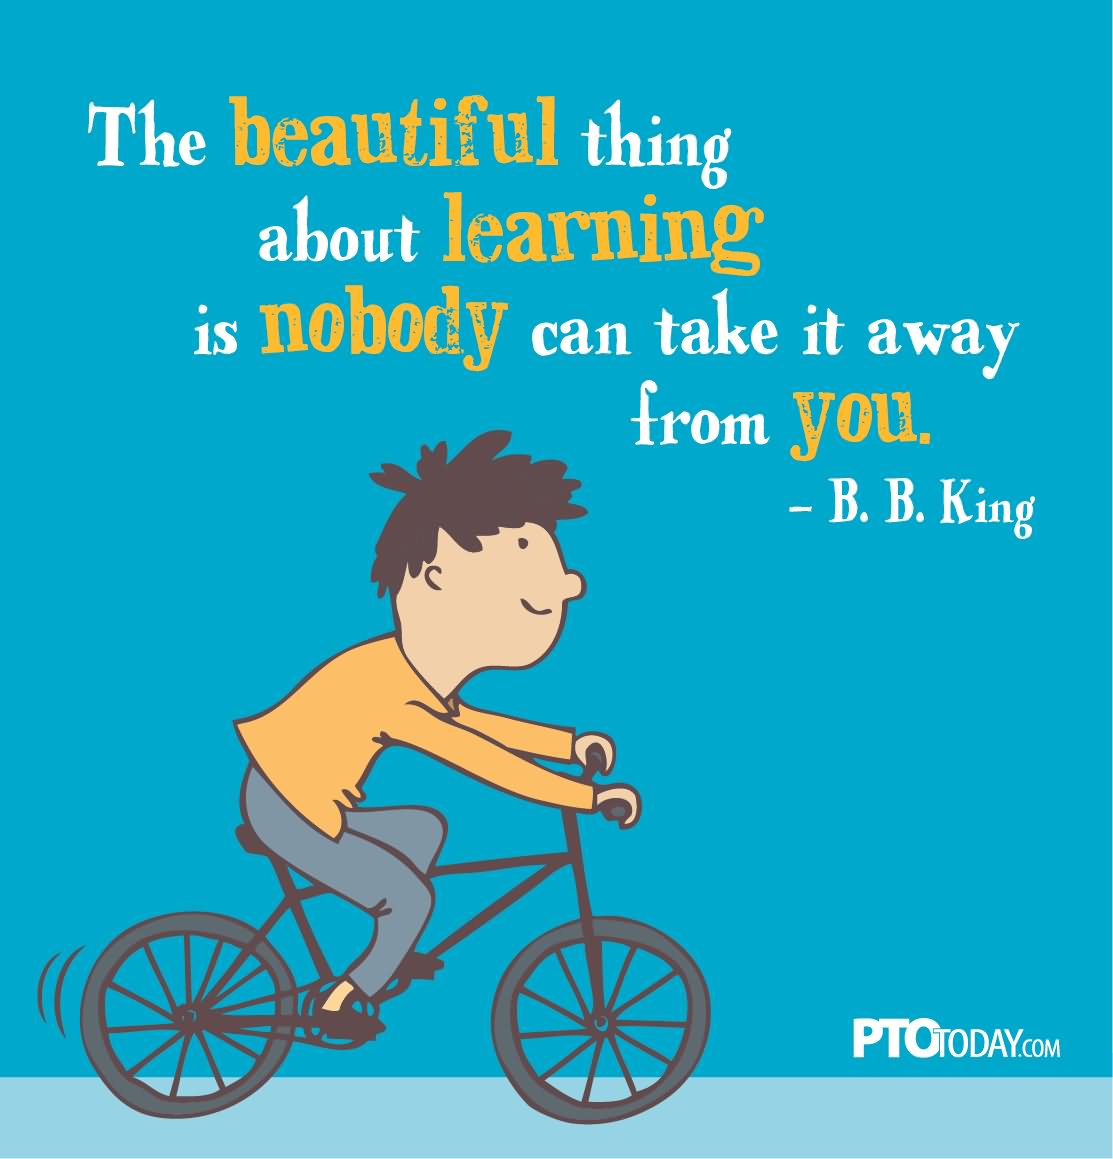 The beautiful thing about learning is nobody can take it away from you.